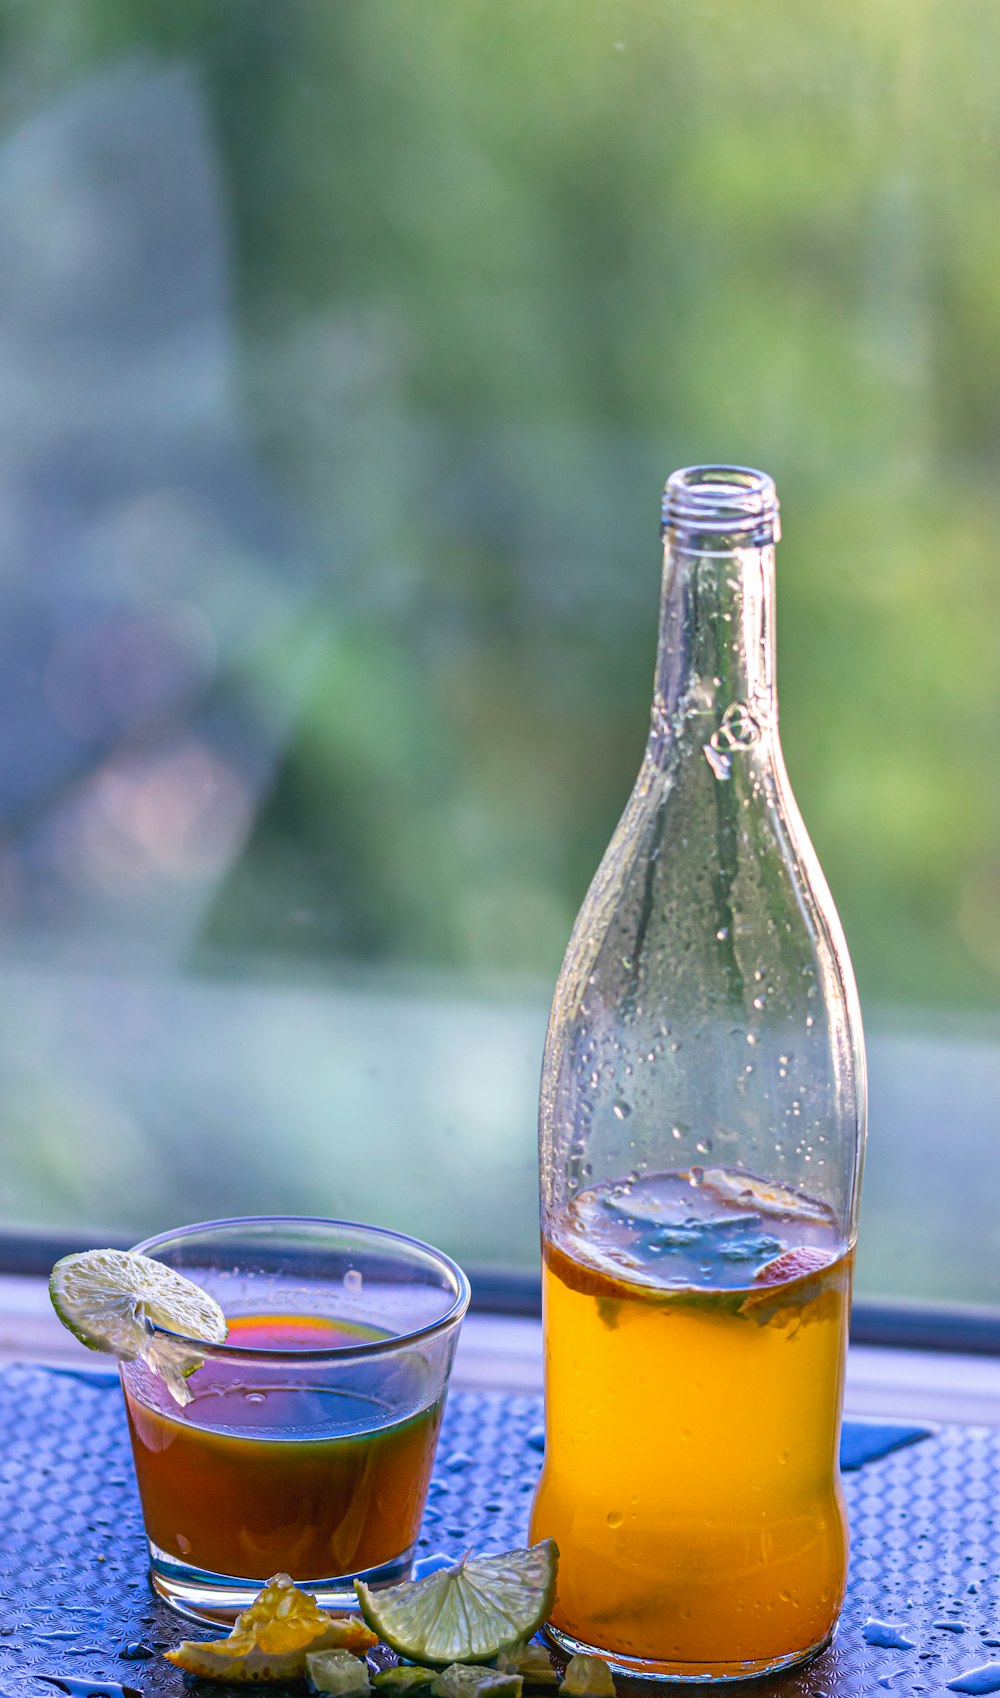 clear glass bottle with yellow liquid